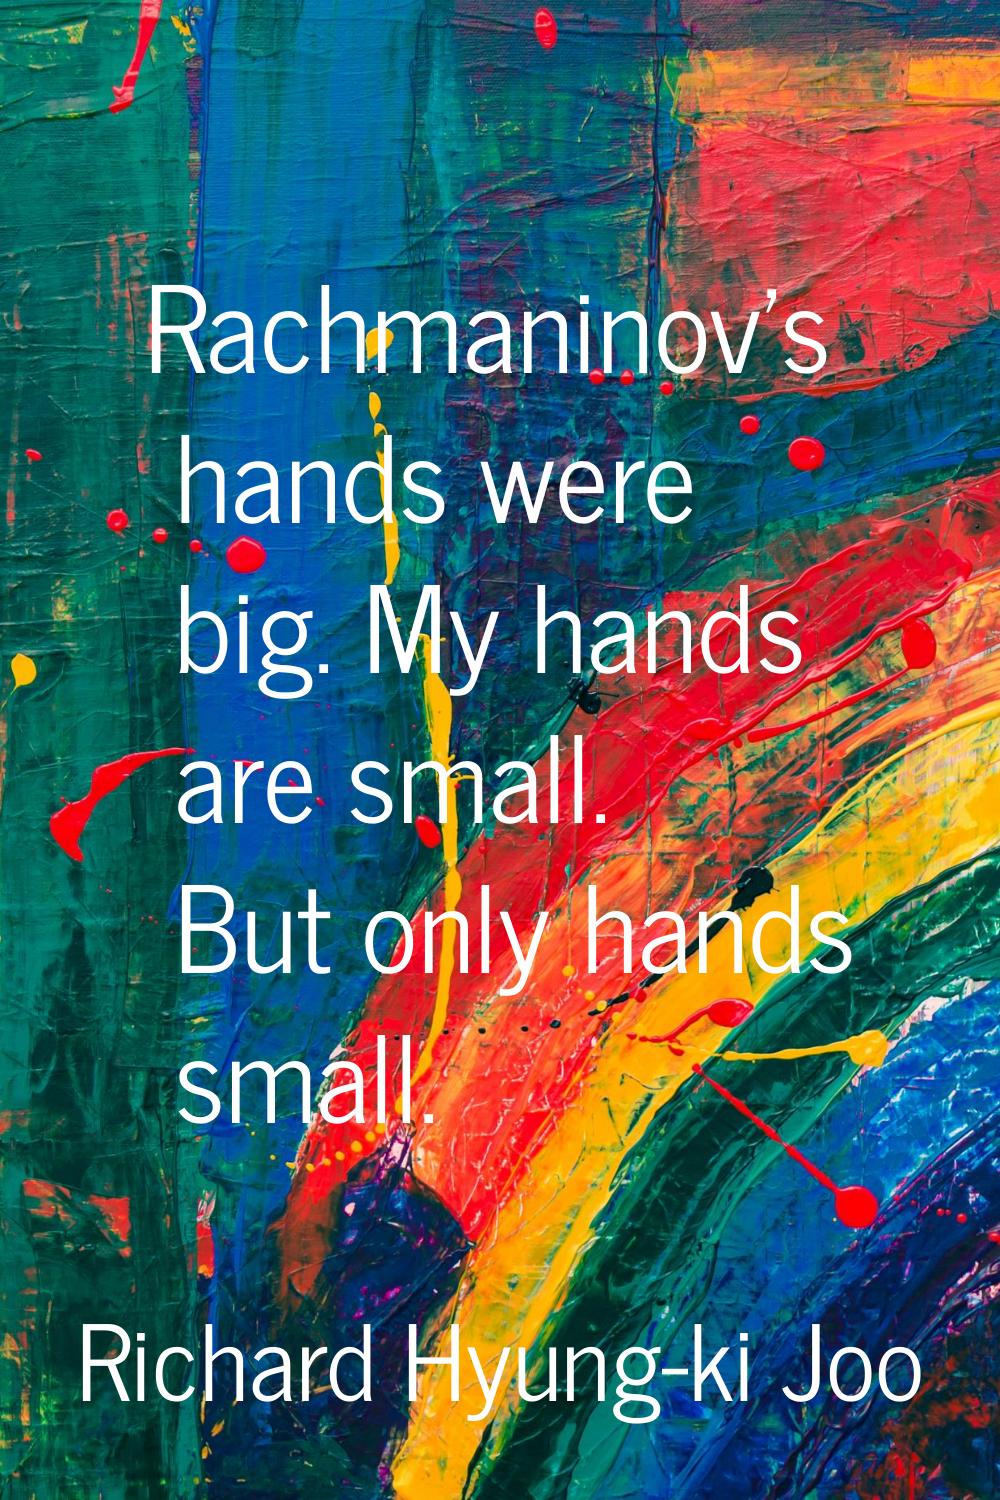 Rachmaninov's hands were big. My hands are small. But only hands small.